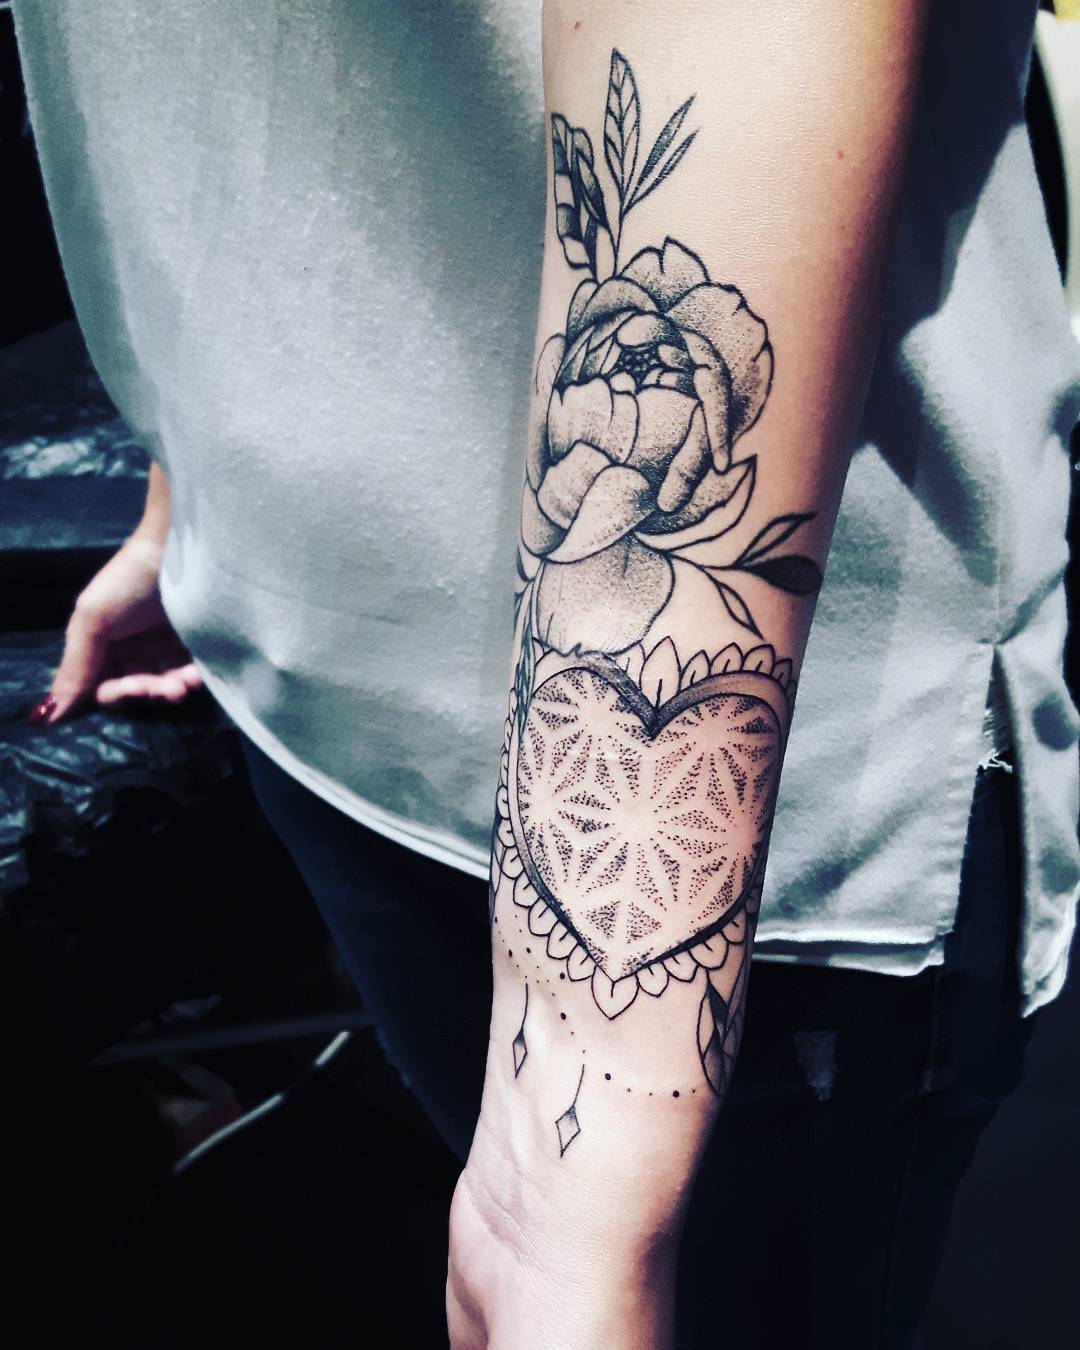 Empowering Arm Tattoos for Women: Symbolism and Significance - Tattify.org